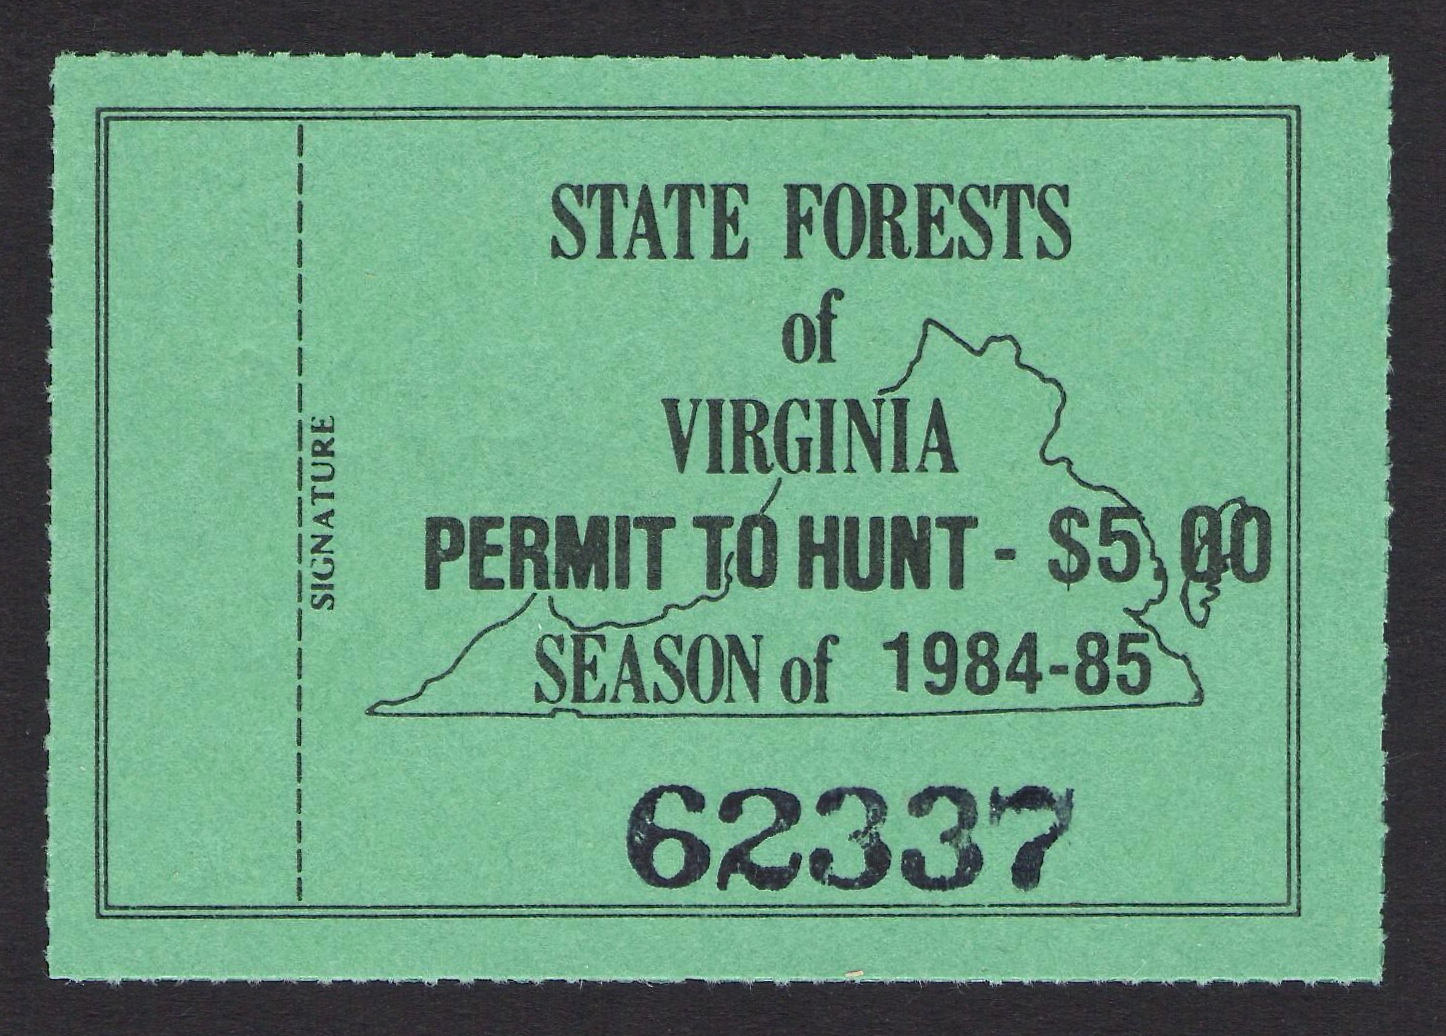 1984-85 Virginia State Forest